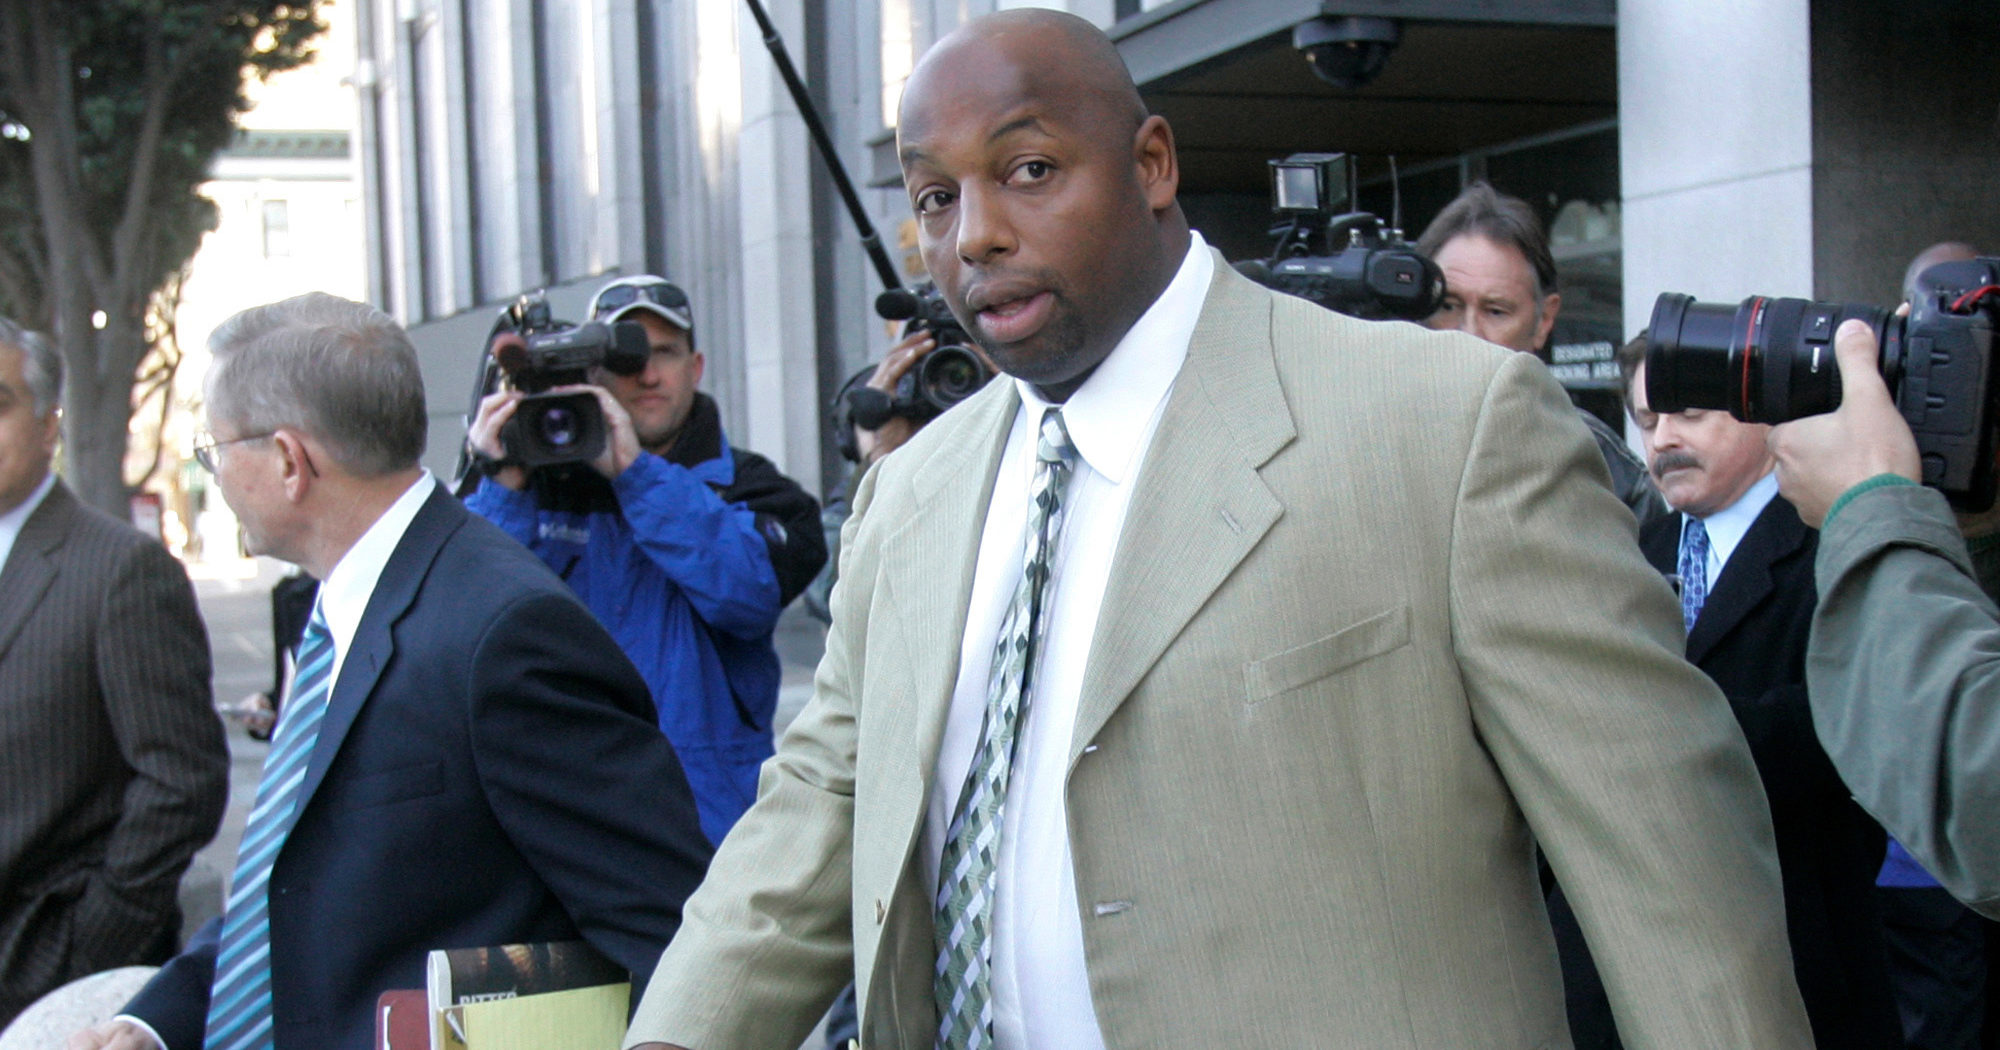 In this Jan. 18, 2008, file photo, former NFL football player Dana Stubblefield leaves a federal courthouse in San Francisco. Stubblefield was convicted July 27, 2020, of the rape of a developmentally disabled woman after, prosecutors said, he lured the victim to his home with the promise of a babysitting job. A jury found Stubblefield, 49, guilty of rape by force, oral copulation by force and false imprisonment, and acquitted him of raping a person incapable of giving consent, the San Francisco Chronicle reported. Jurors also found that Stubblefield used a gun during the assault, prosecutors said.